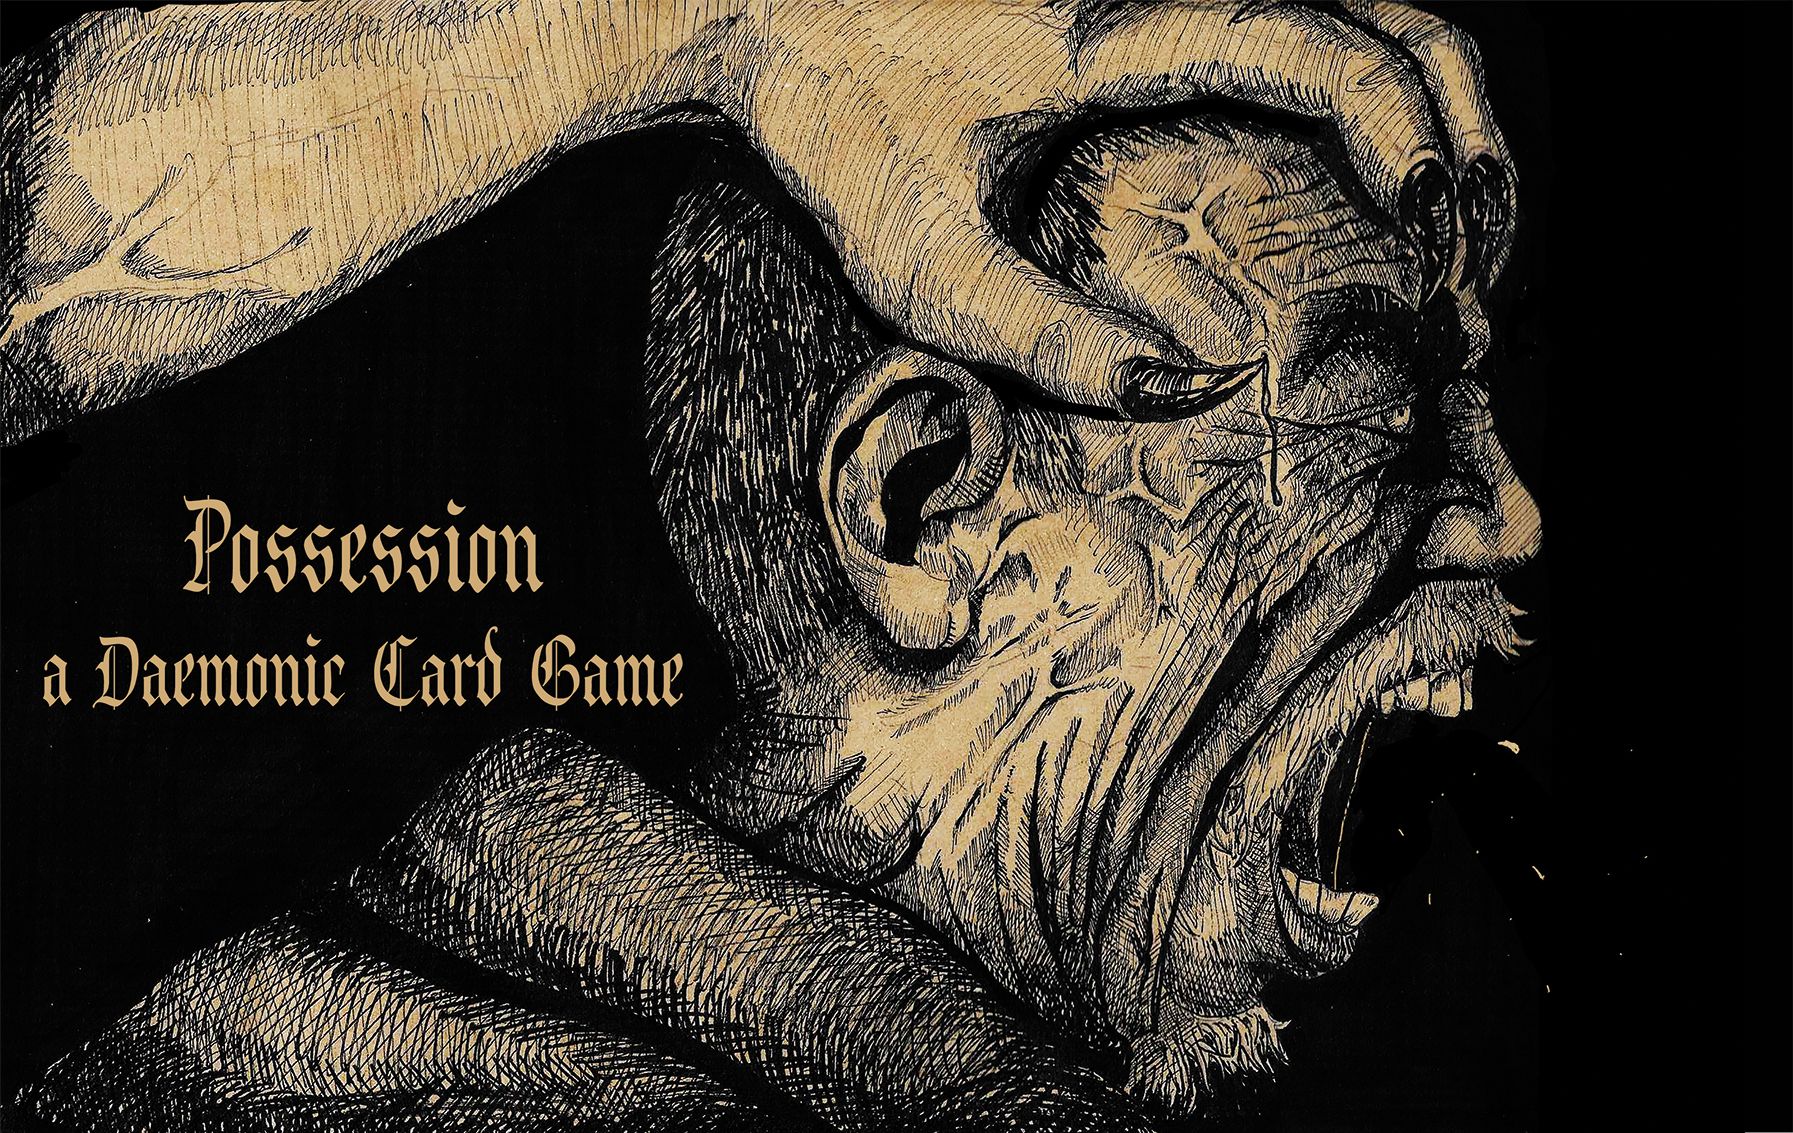 Possession: A Daemonic Card Game